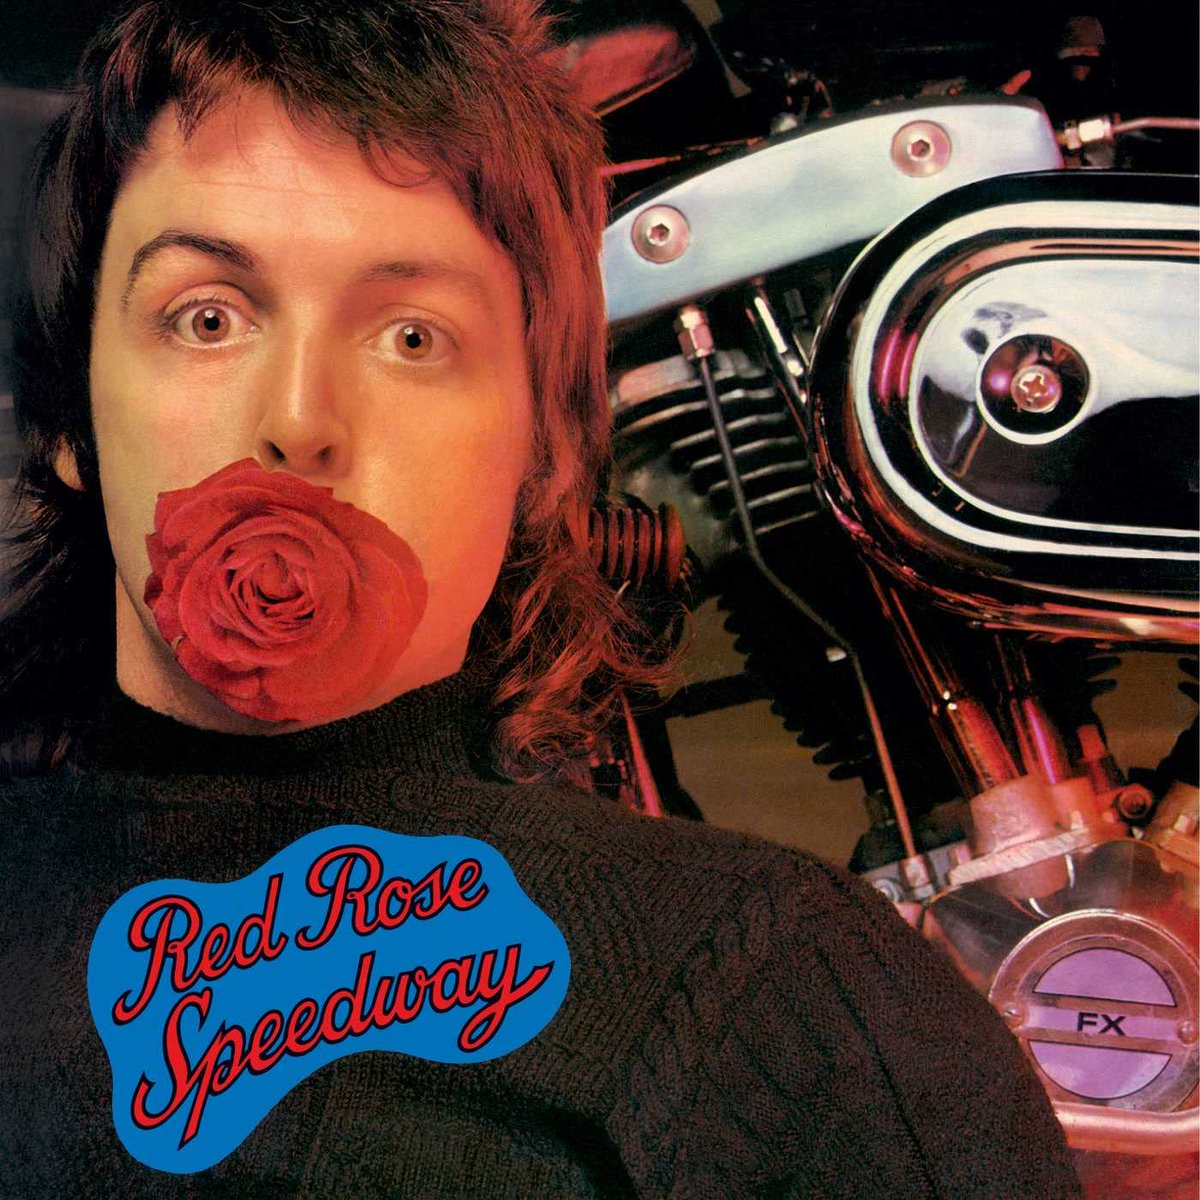 Released 50 years ago today.

#redrosespeedway #wings